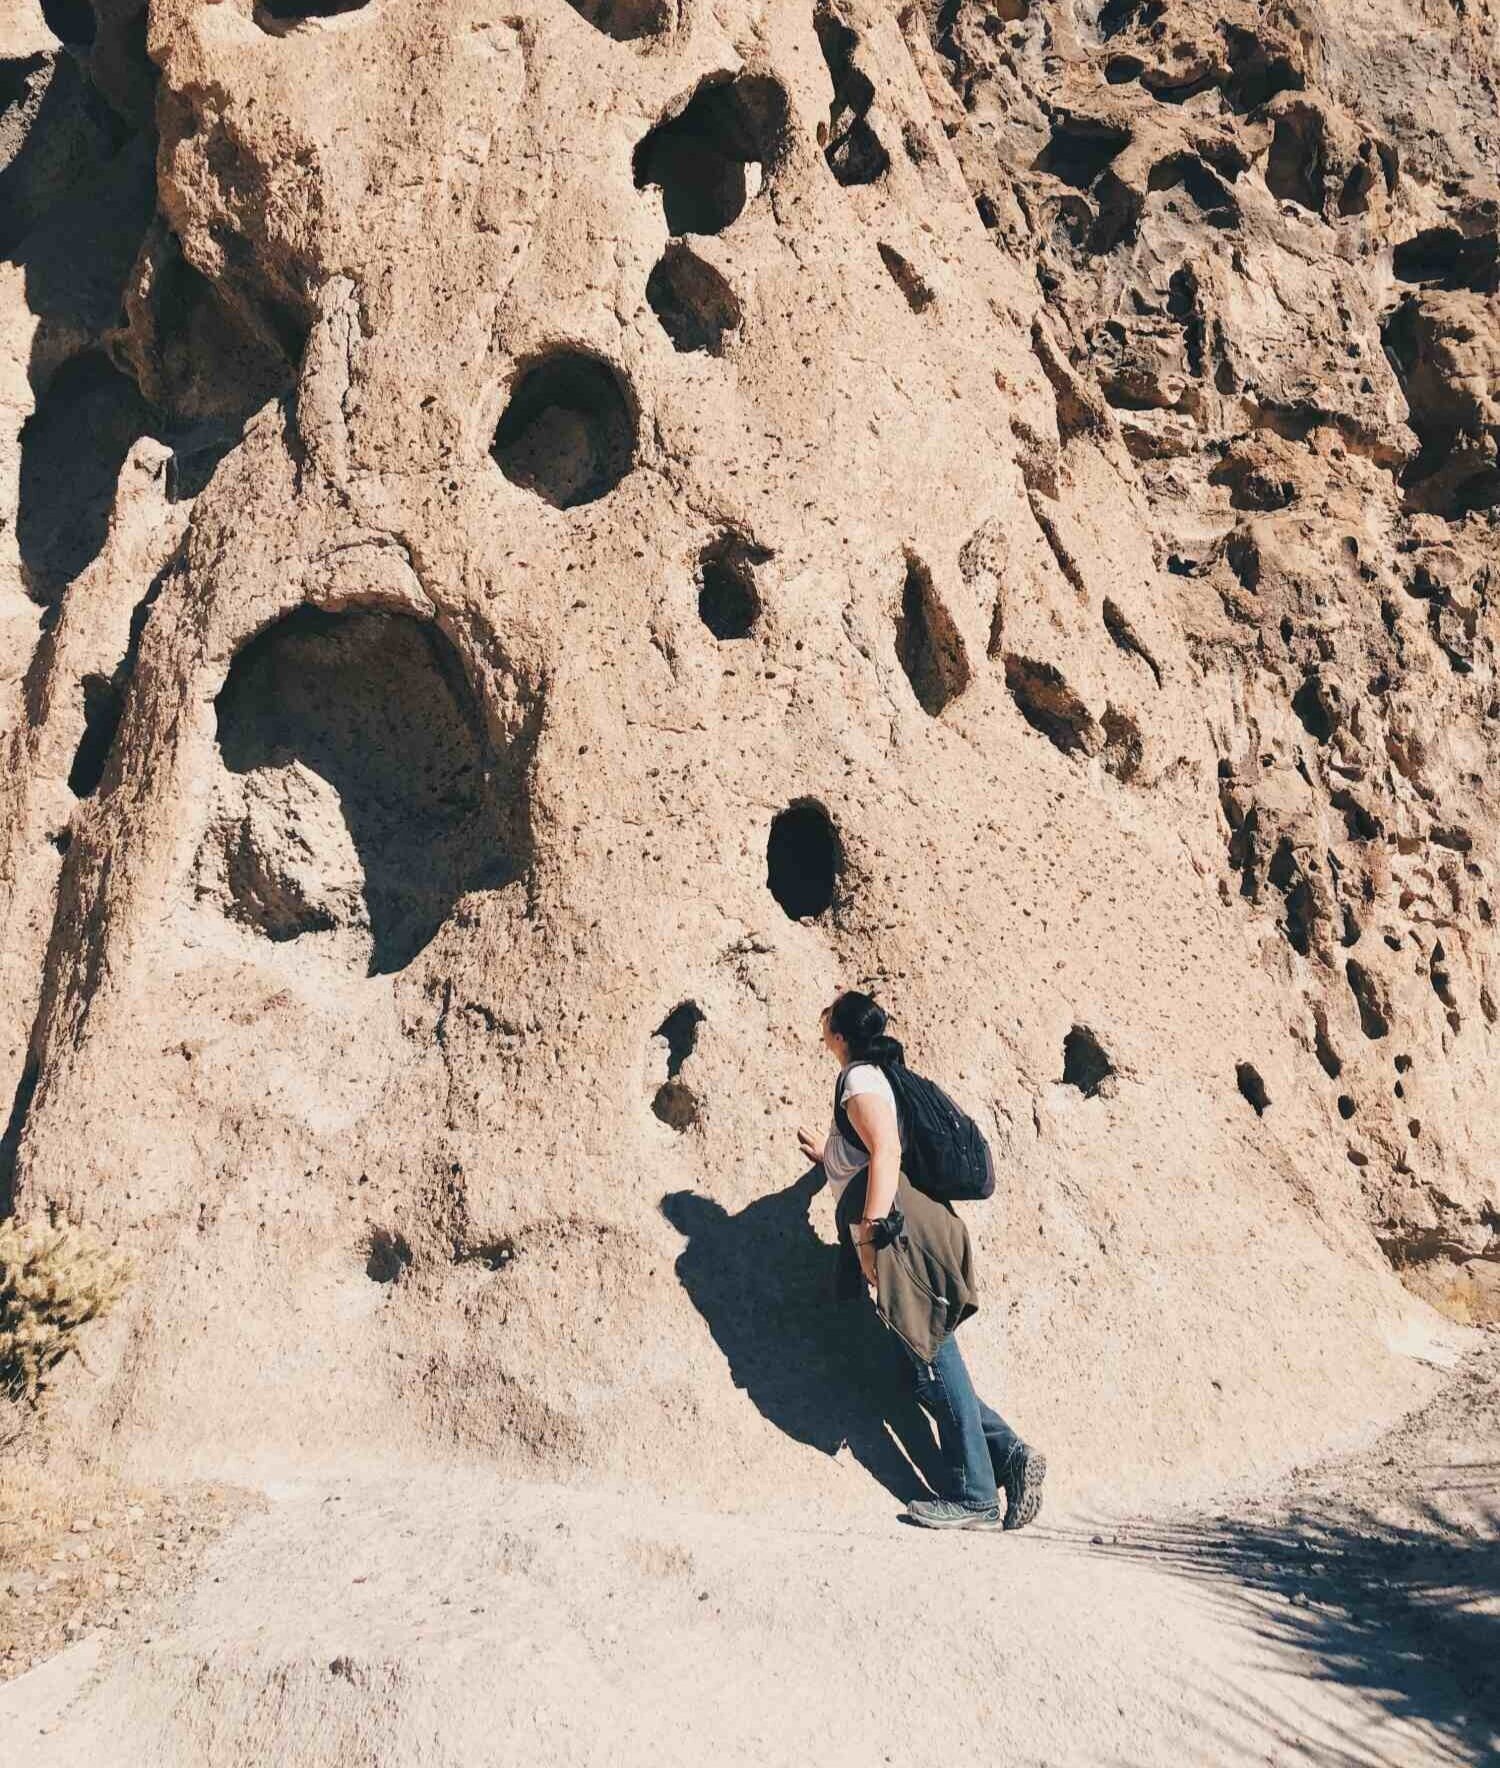 Hiking the Hole-in-the-Wall Rings Trail at Mojave National Preserve